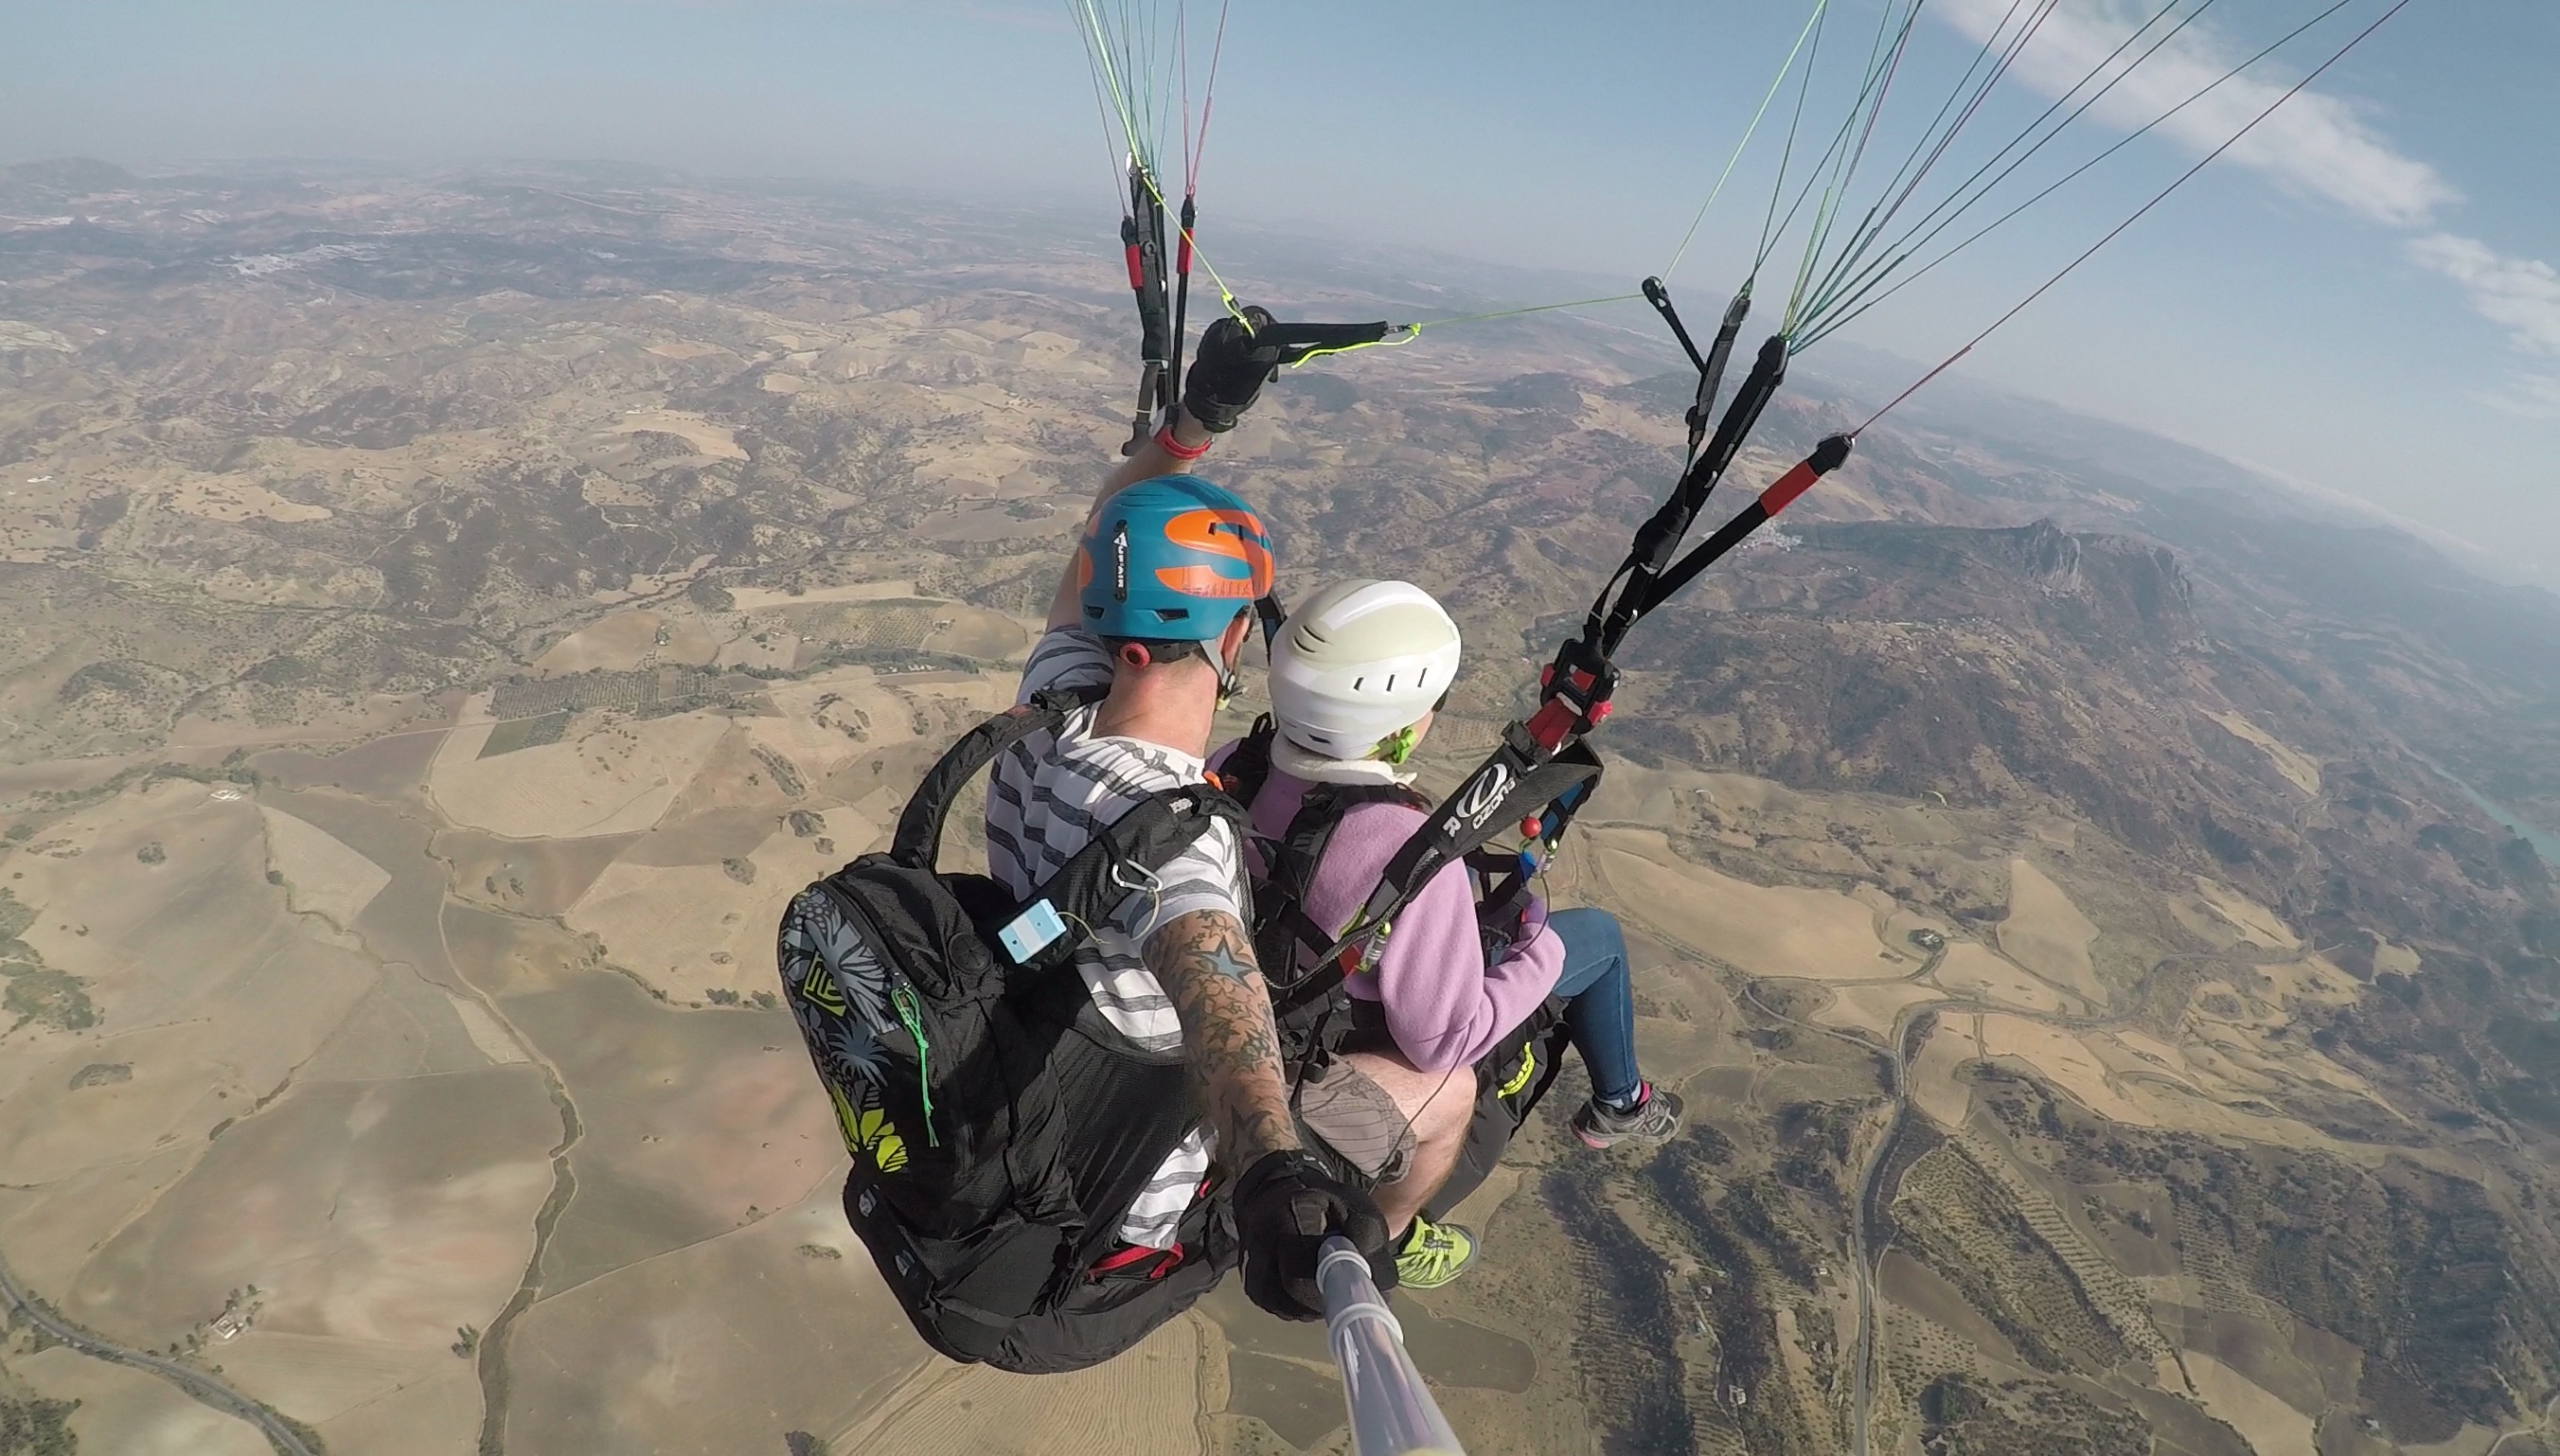 Paragliding experience with Mile High Paragliding